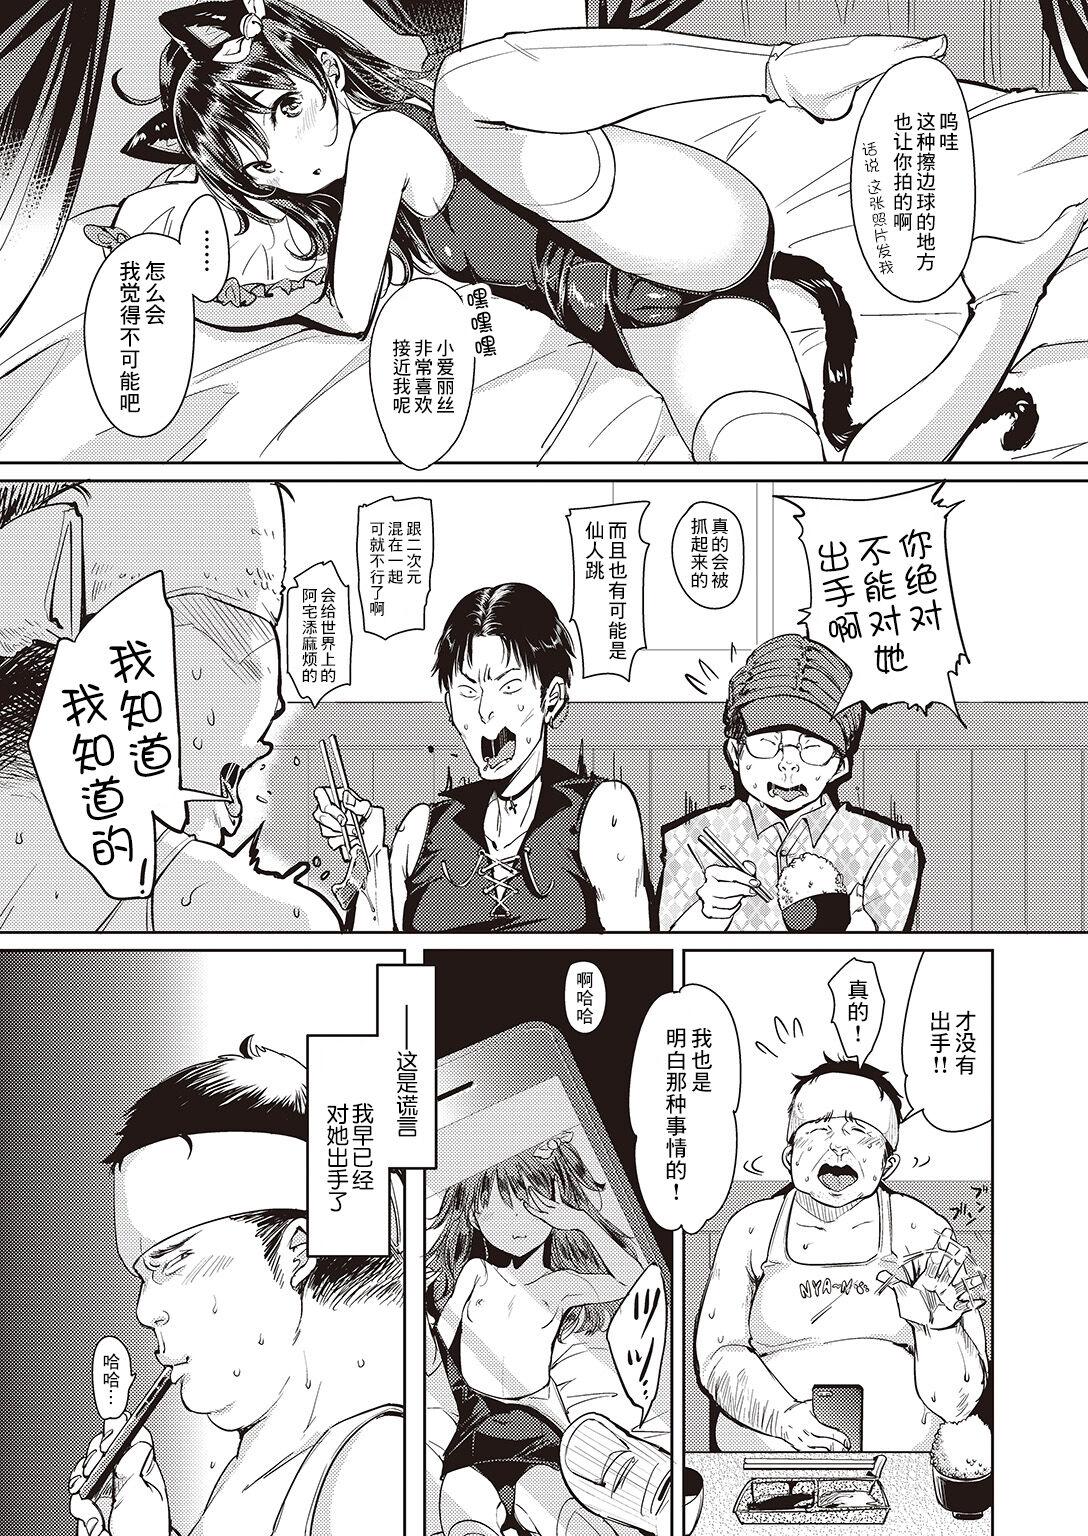 Gaysex にゃんにゃん個人撮影会 Pick Up - Page 3